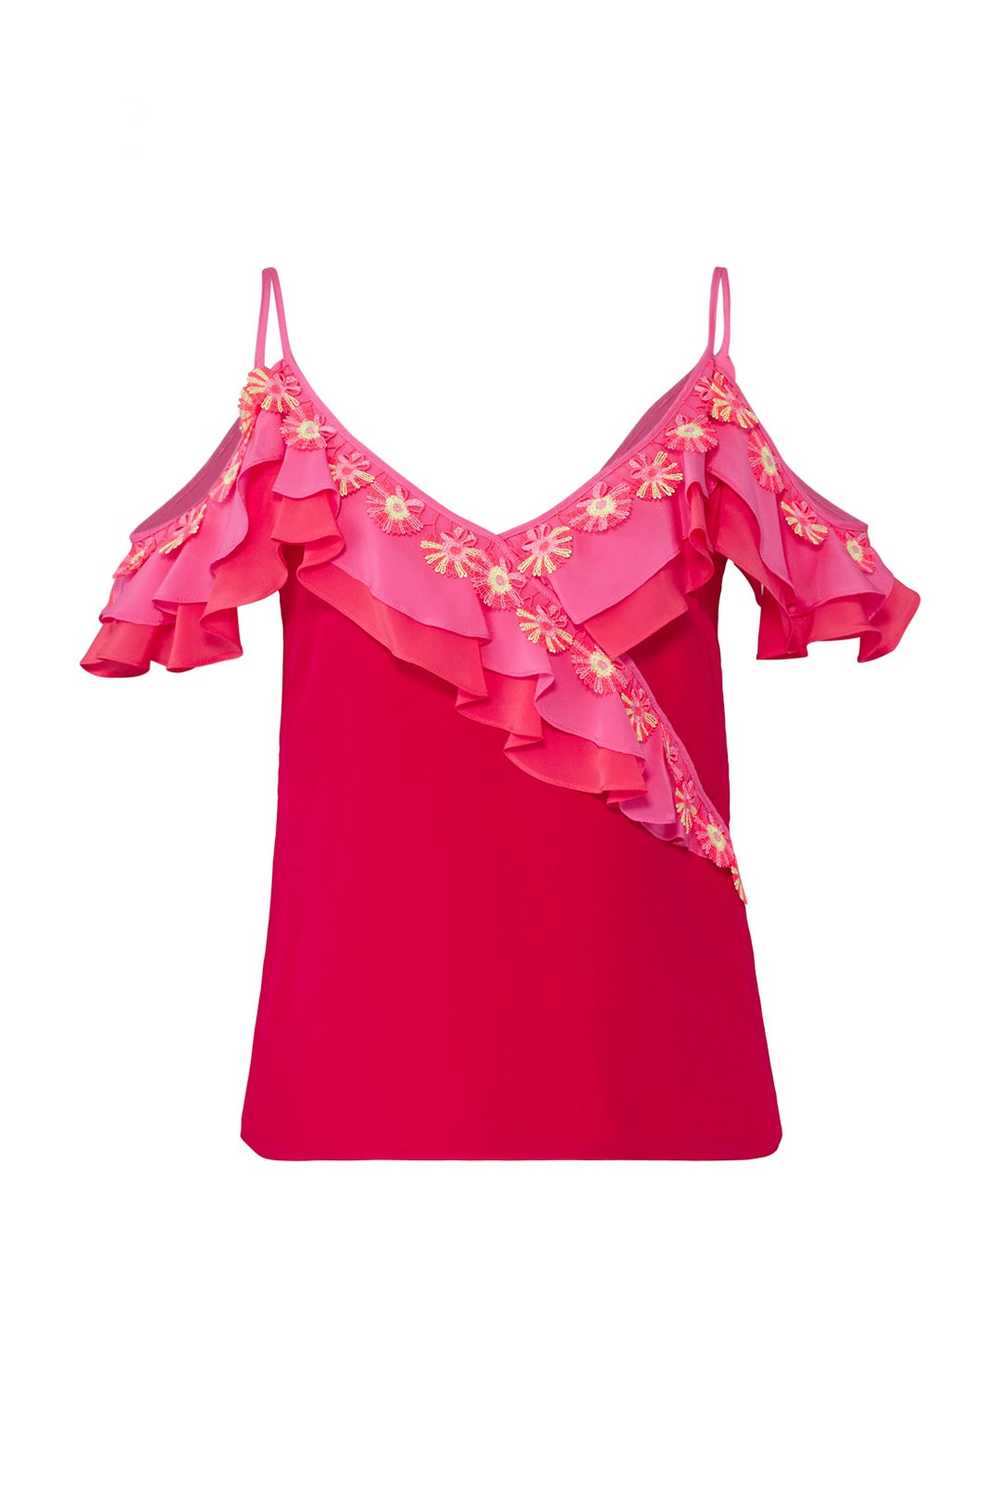 Peter Pilotto Mixed Pink Cold Shoulder Top - image 4